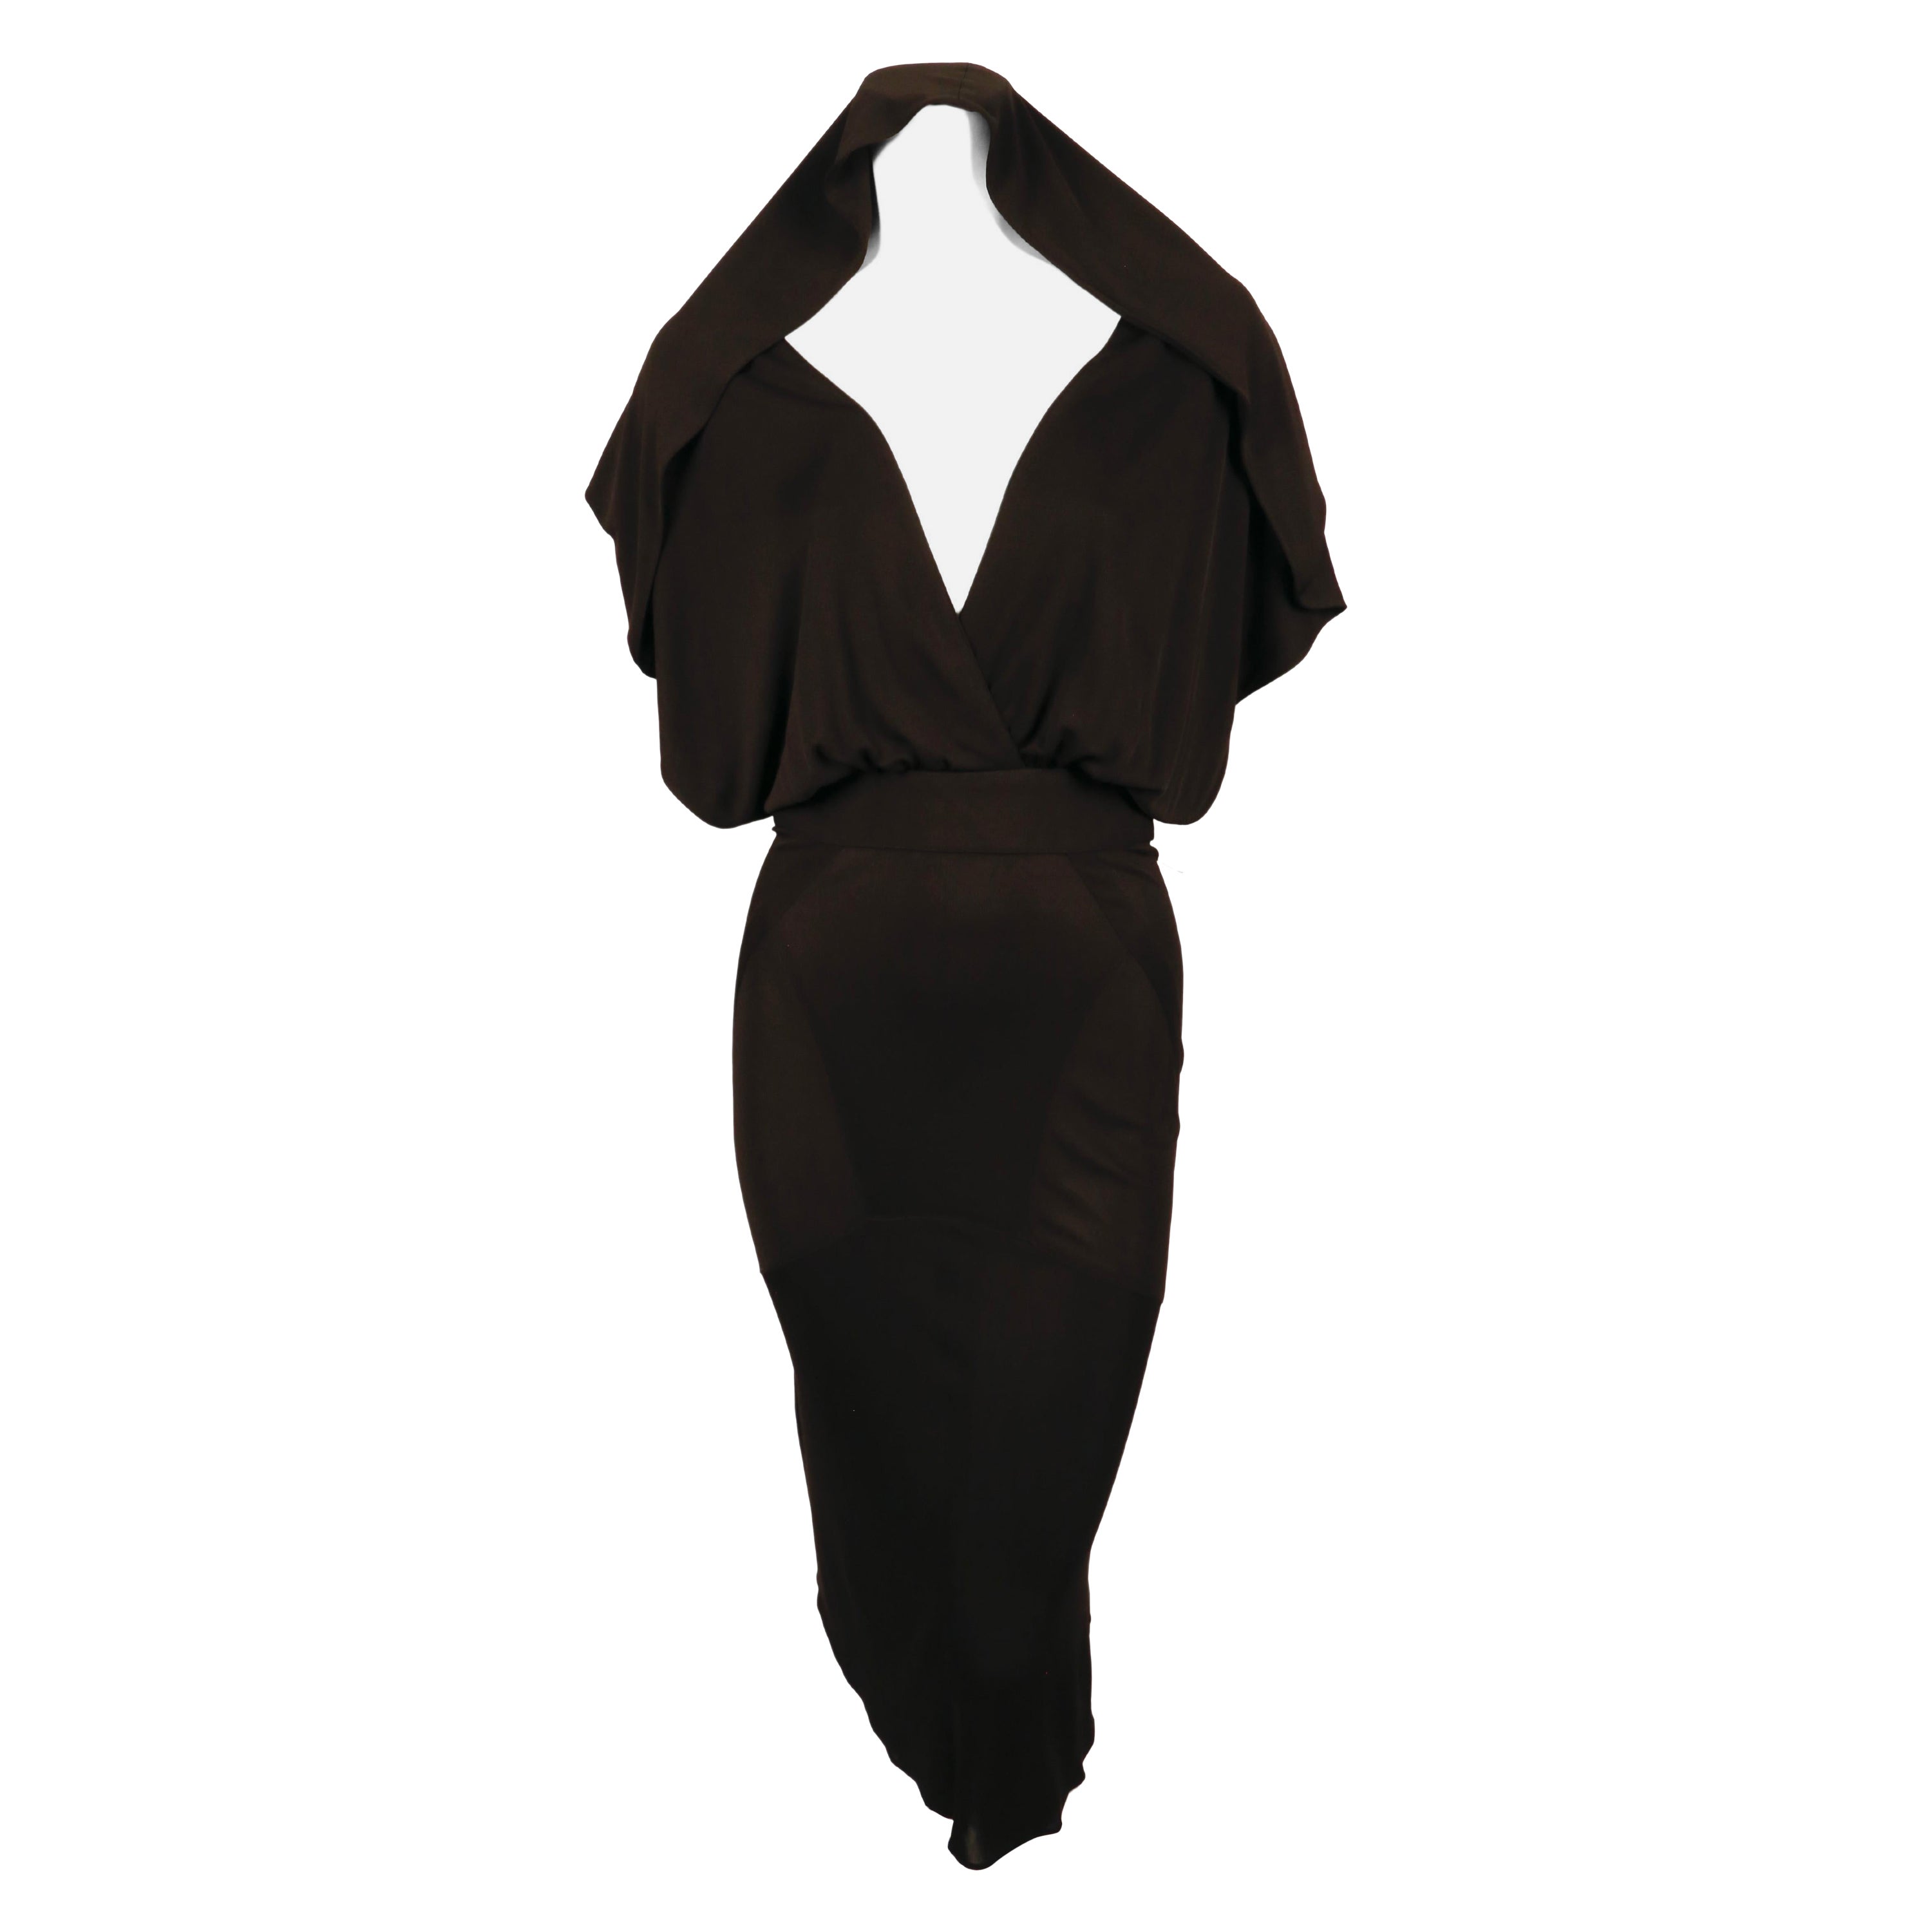 very rare 1984 AZZEDINE ALAIA iconic hooded jersey dress For Sale